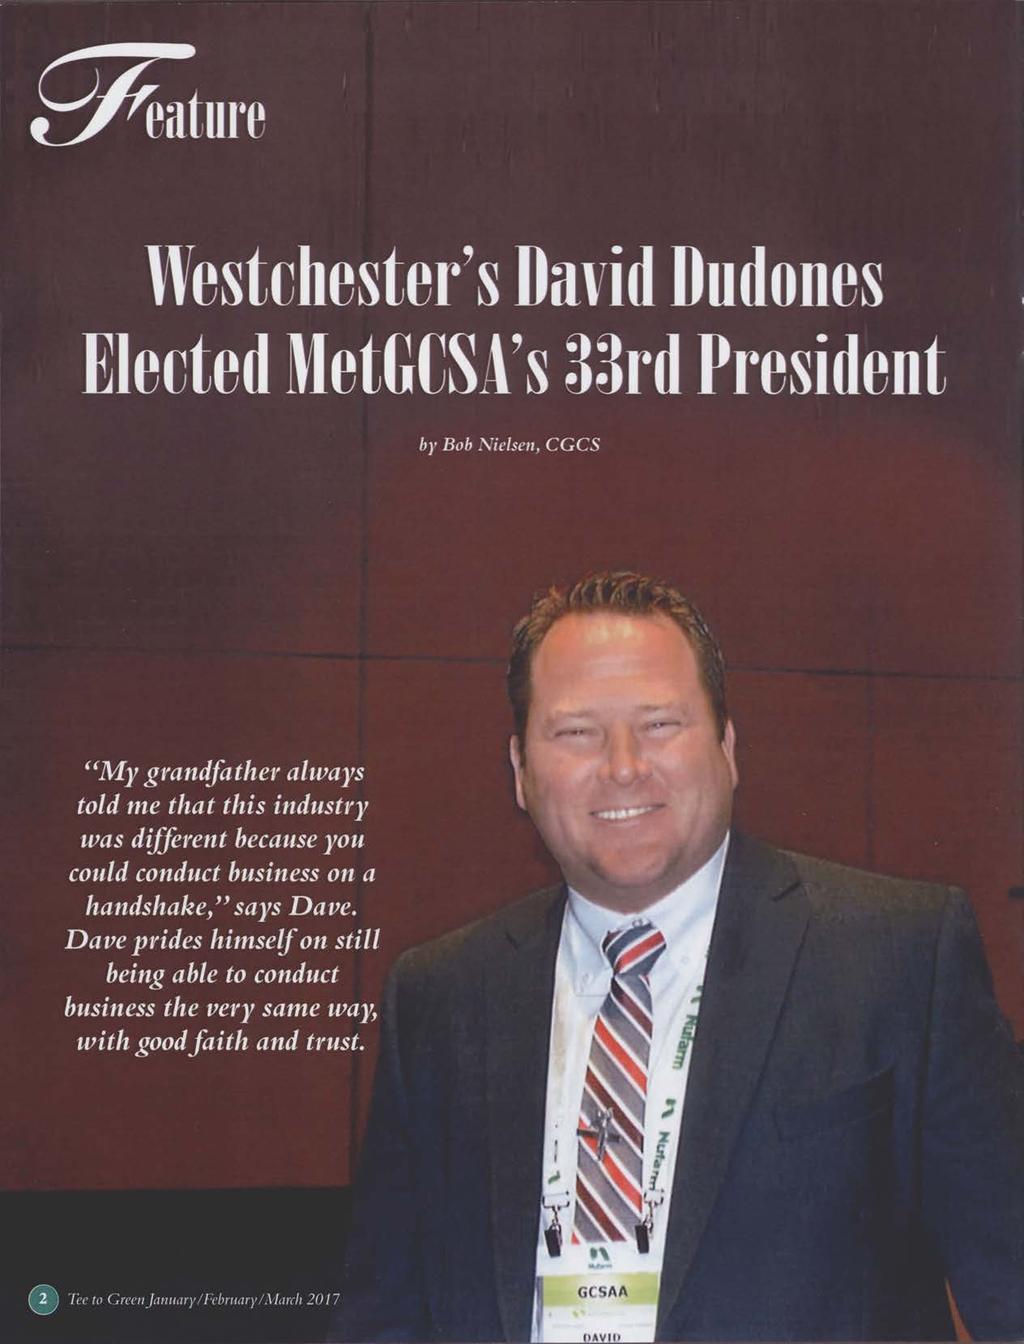 t>avn> Westchester s David Dudones Elected MetGCSA s 33rd President by Bob Nielsen, CG CS M y grandfather always told me that this industry was different because you could conduct